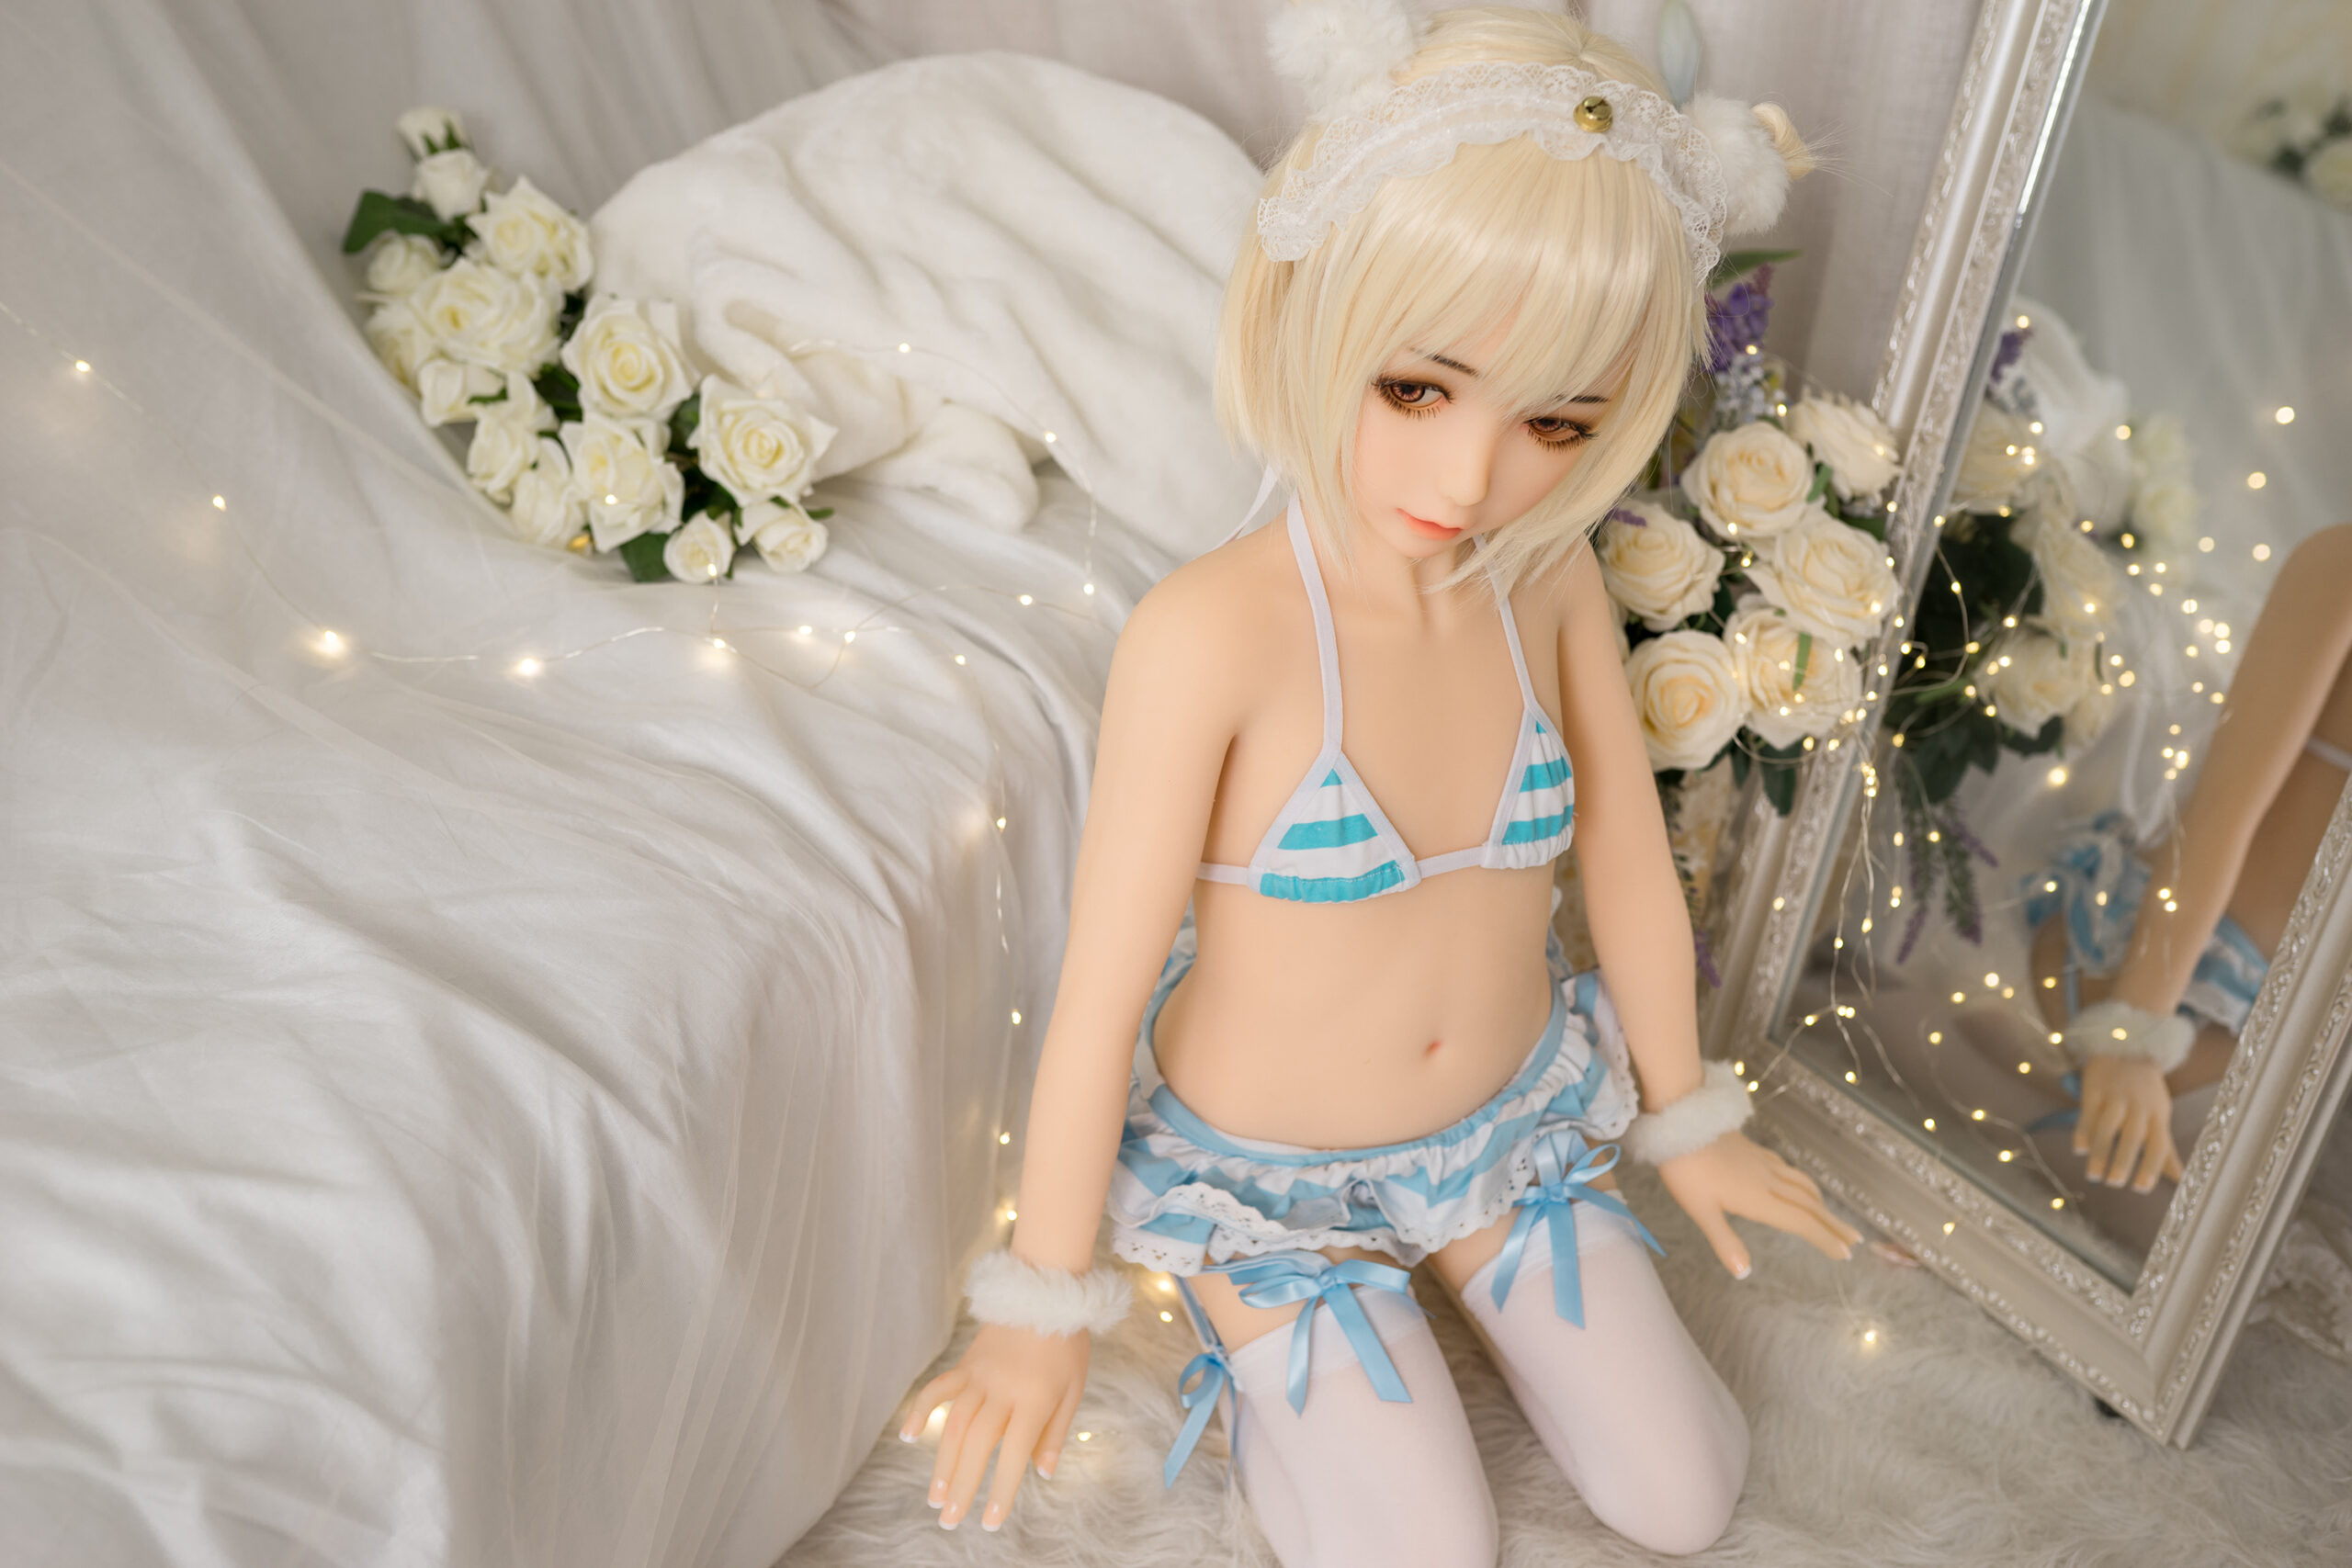 flat chest sex doll wearing stocking